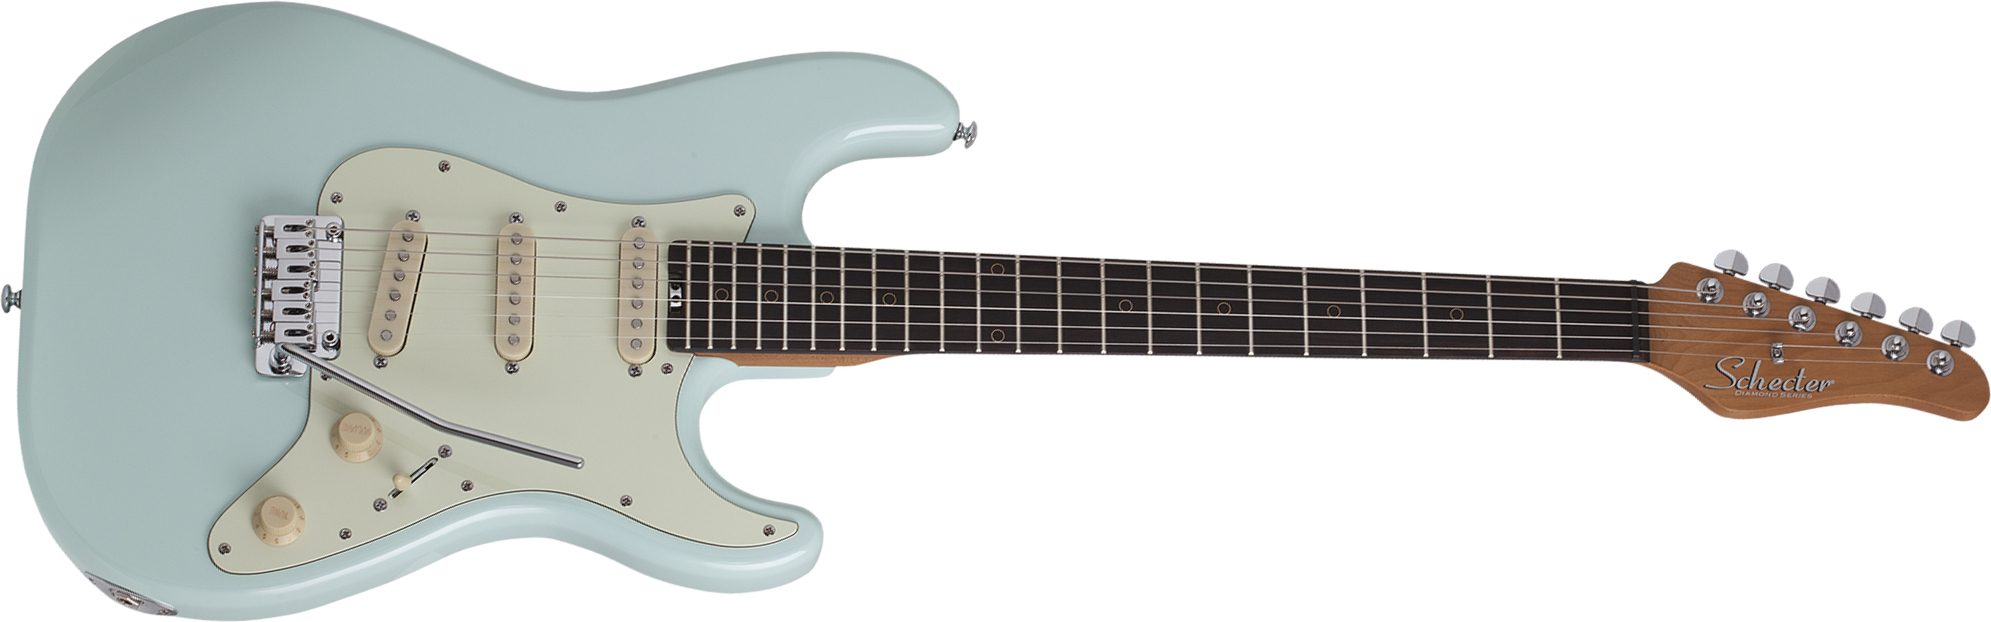 Schecter Nick Johnston Traditional Signature 3s Trem Eb - Atomic Frost - Str shape electric guitar - Main picture